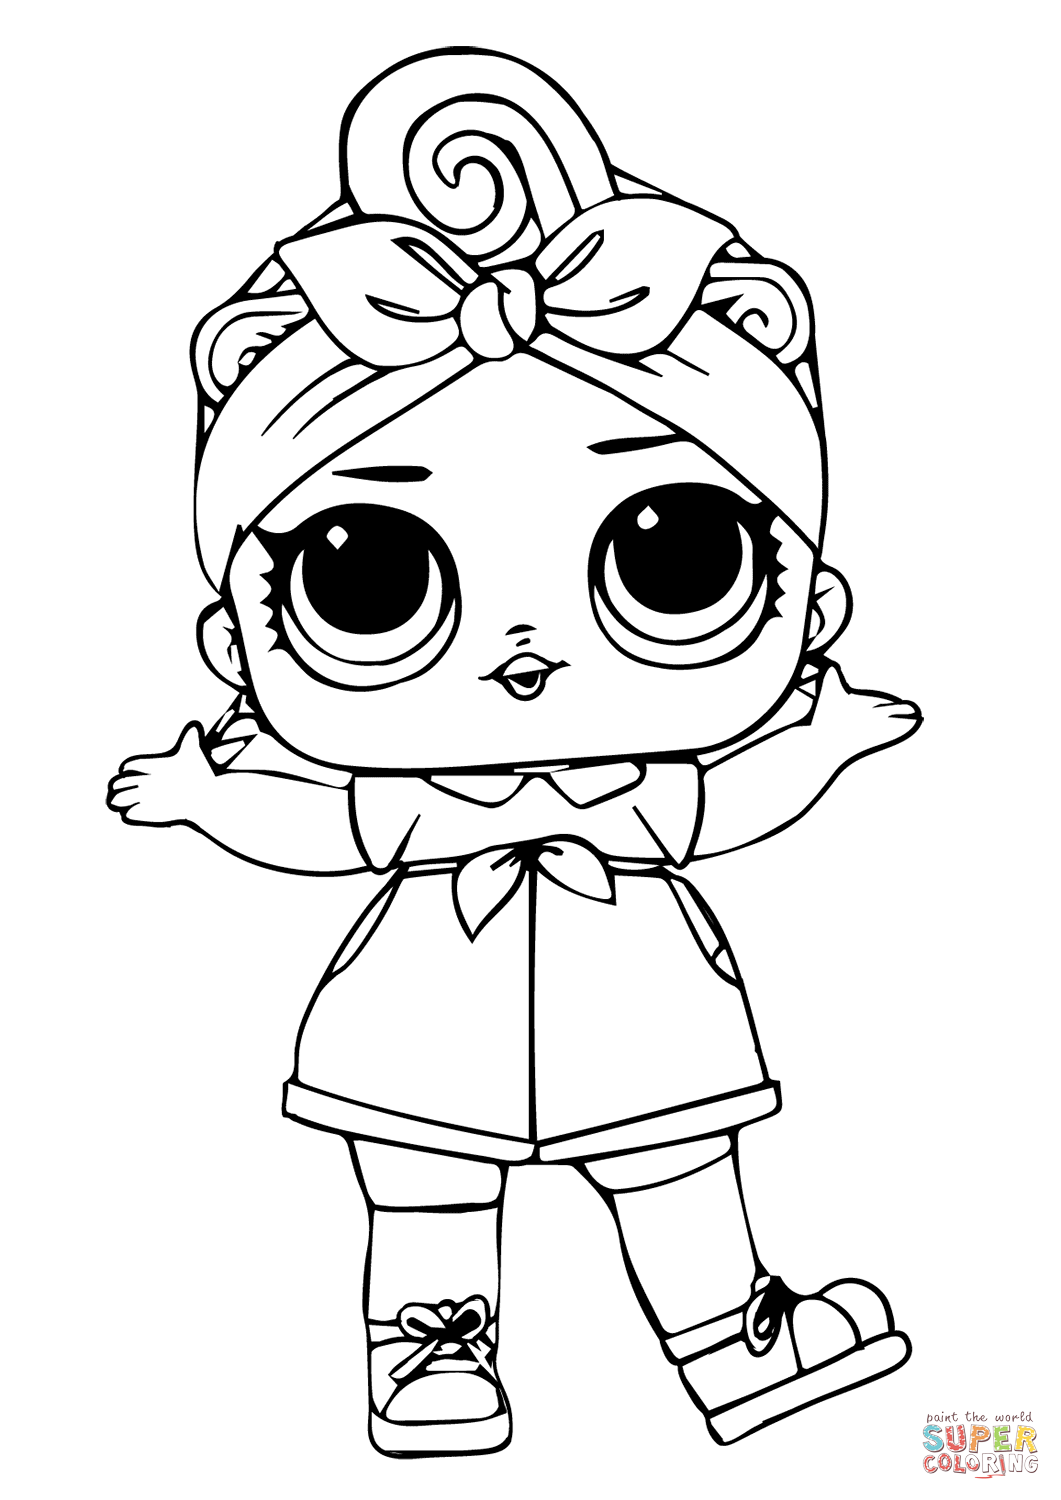 Can Do Baby LOL Surprise Doll coloring page | Free Printable ...